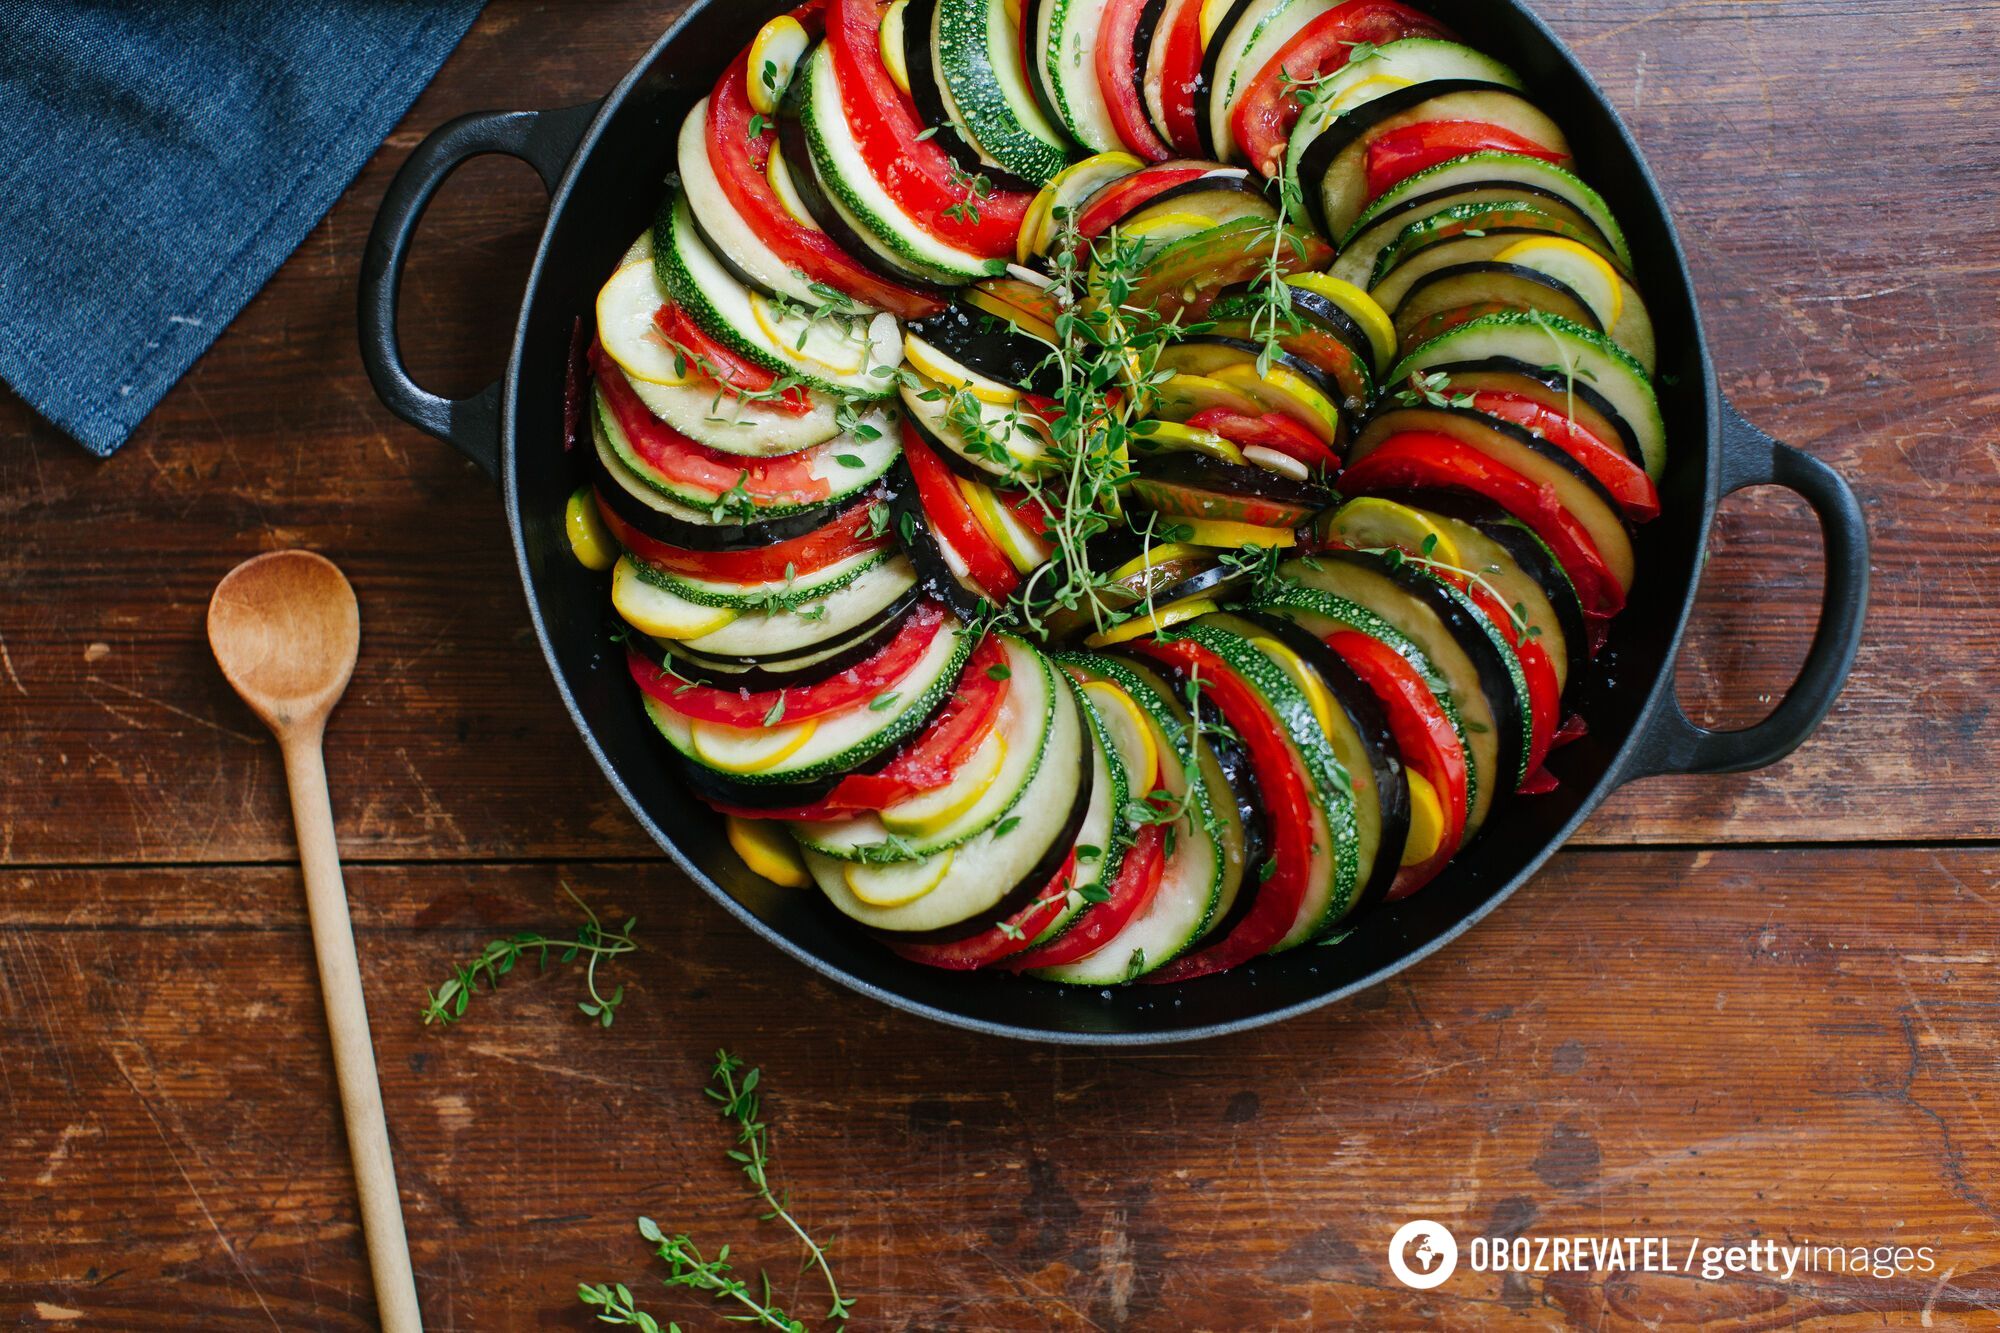 Delicious ratatouille made from vegetables